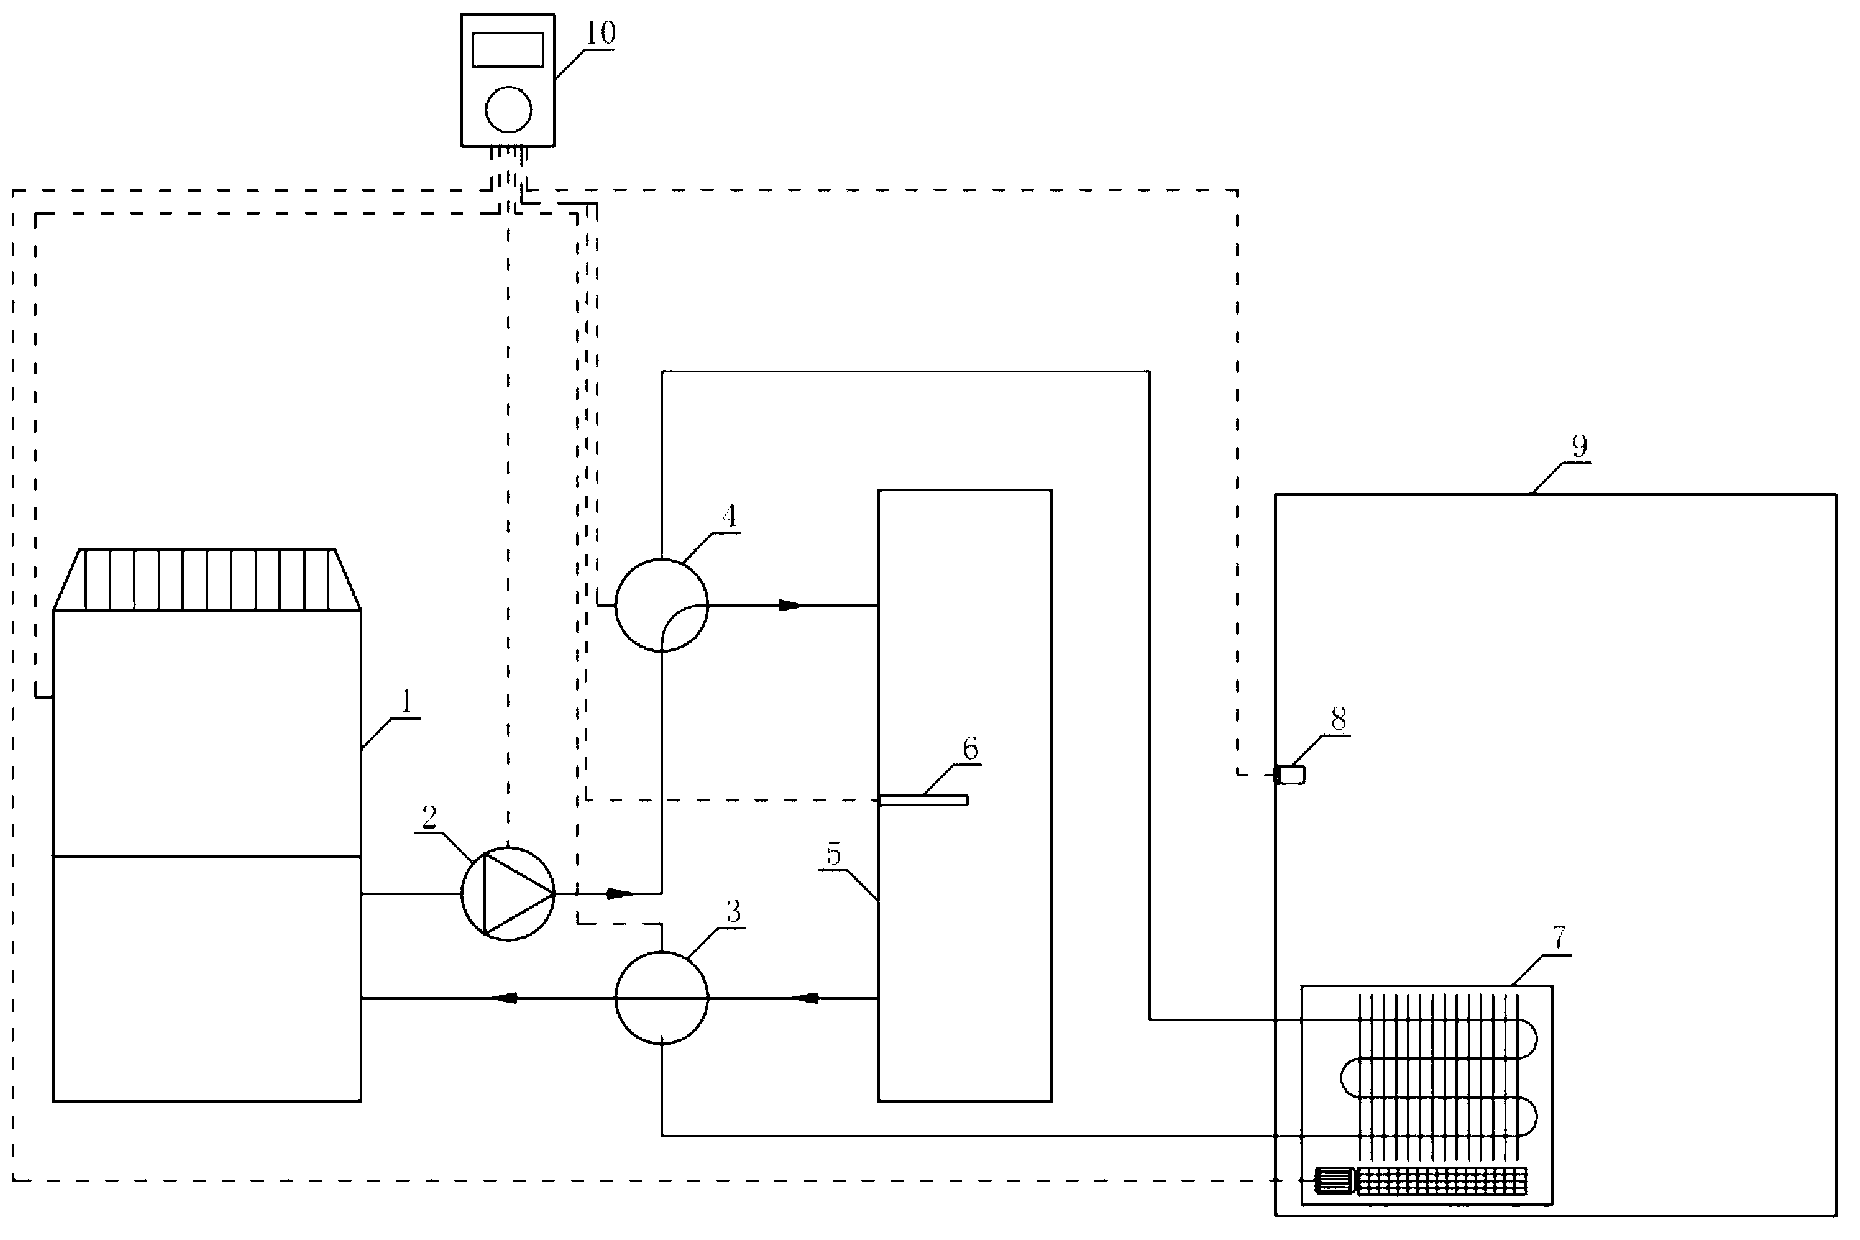 Heat pump air-conditioning system combining air source heat pump with small temperature difference heat exchange tail end